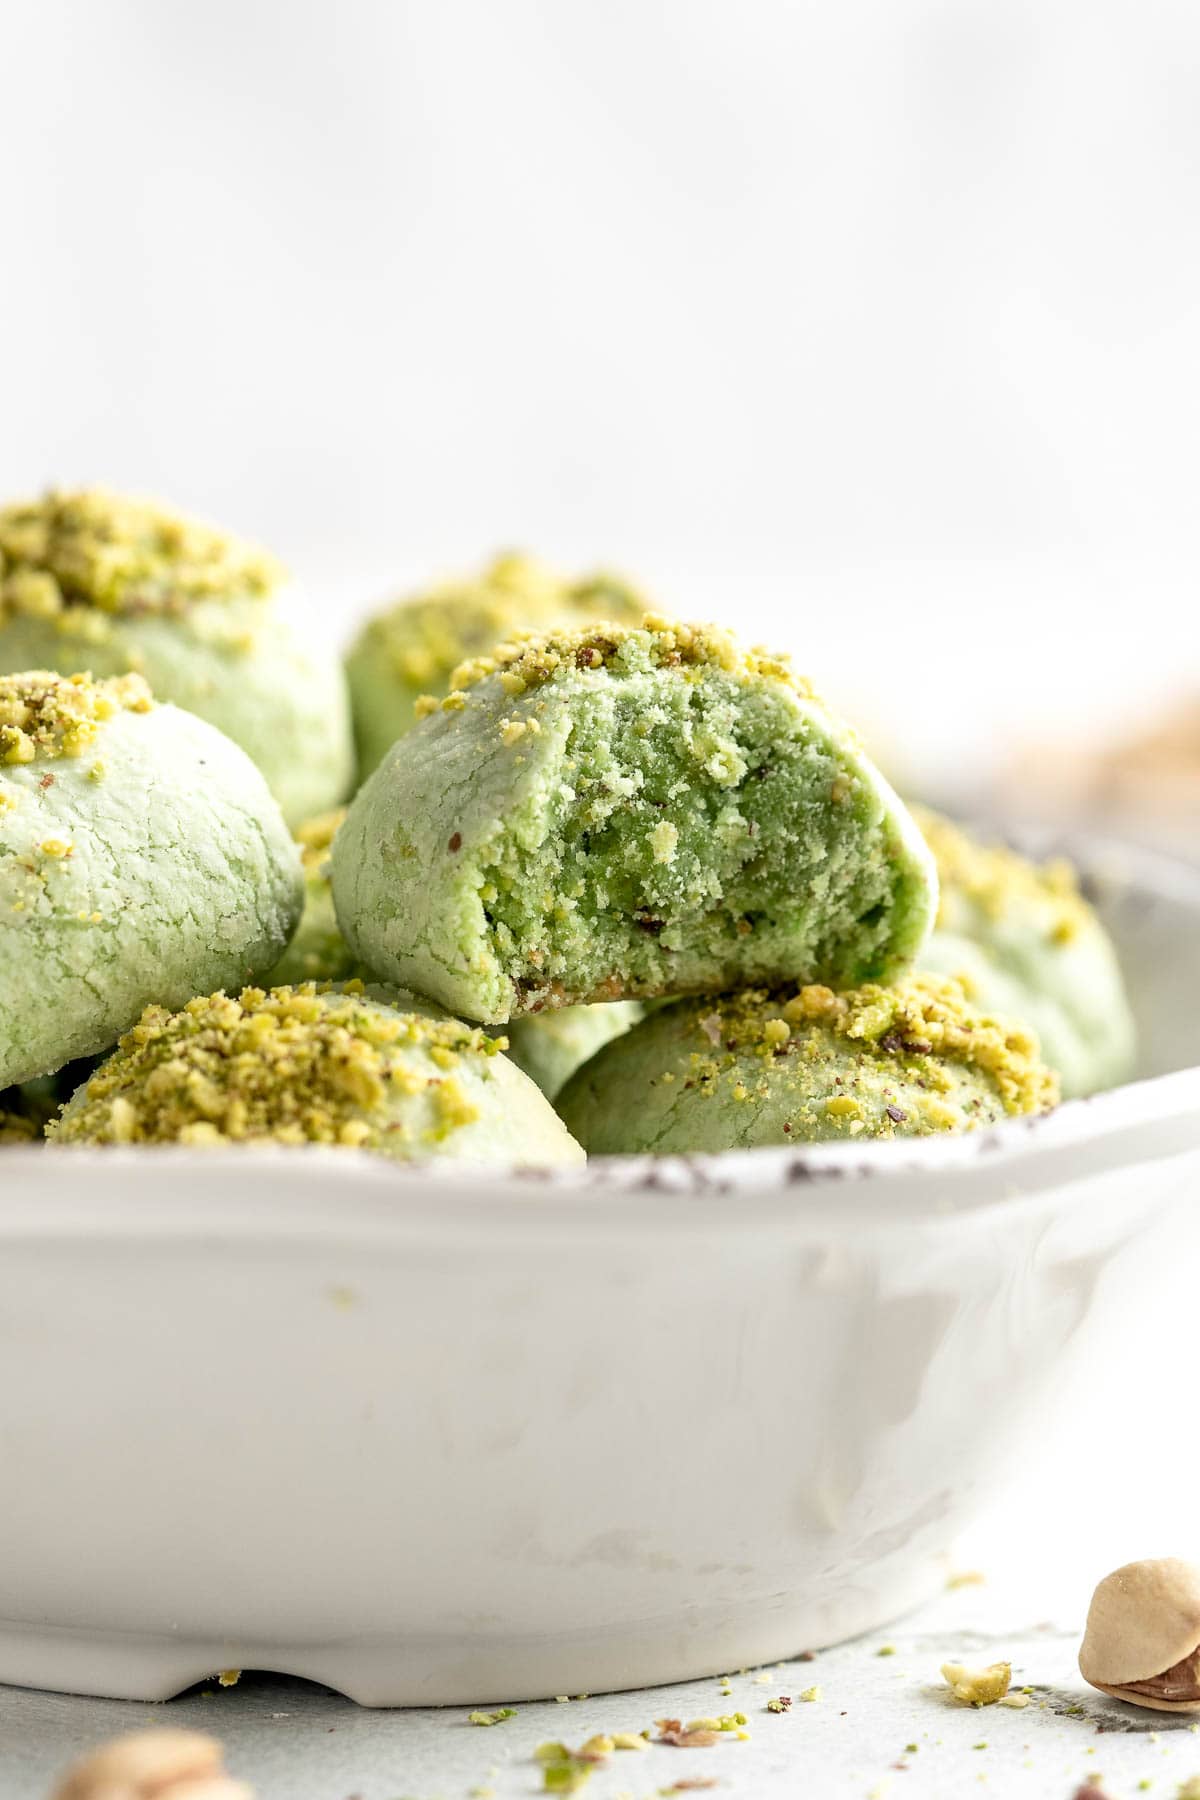 Pistachio Cookies are the perfect little bites, made with real ground pistachios suspended in a buttery, crumbly cookie dough, which melts in your mouth. | aheadofthyme.com